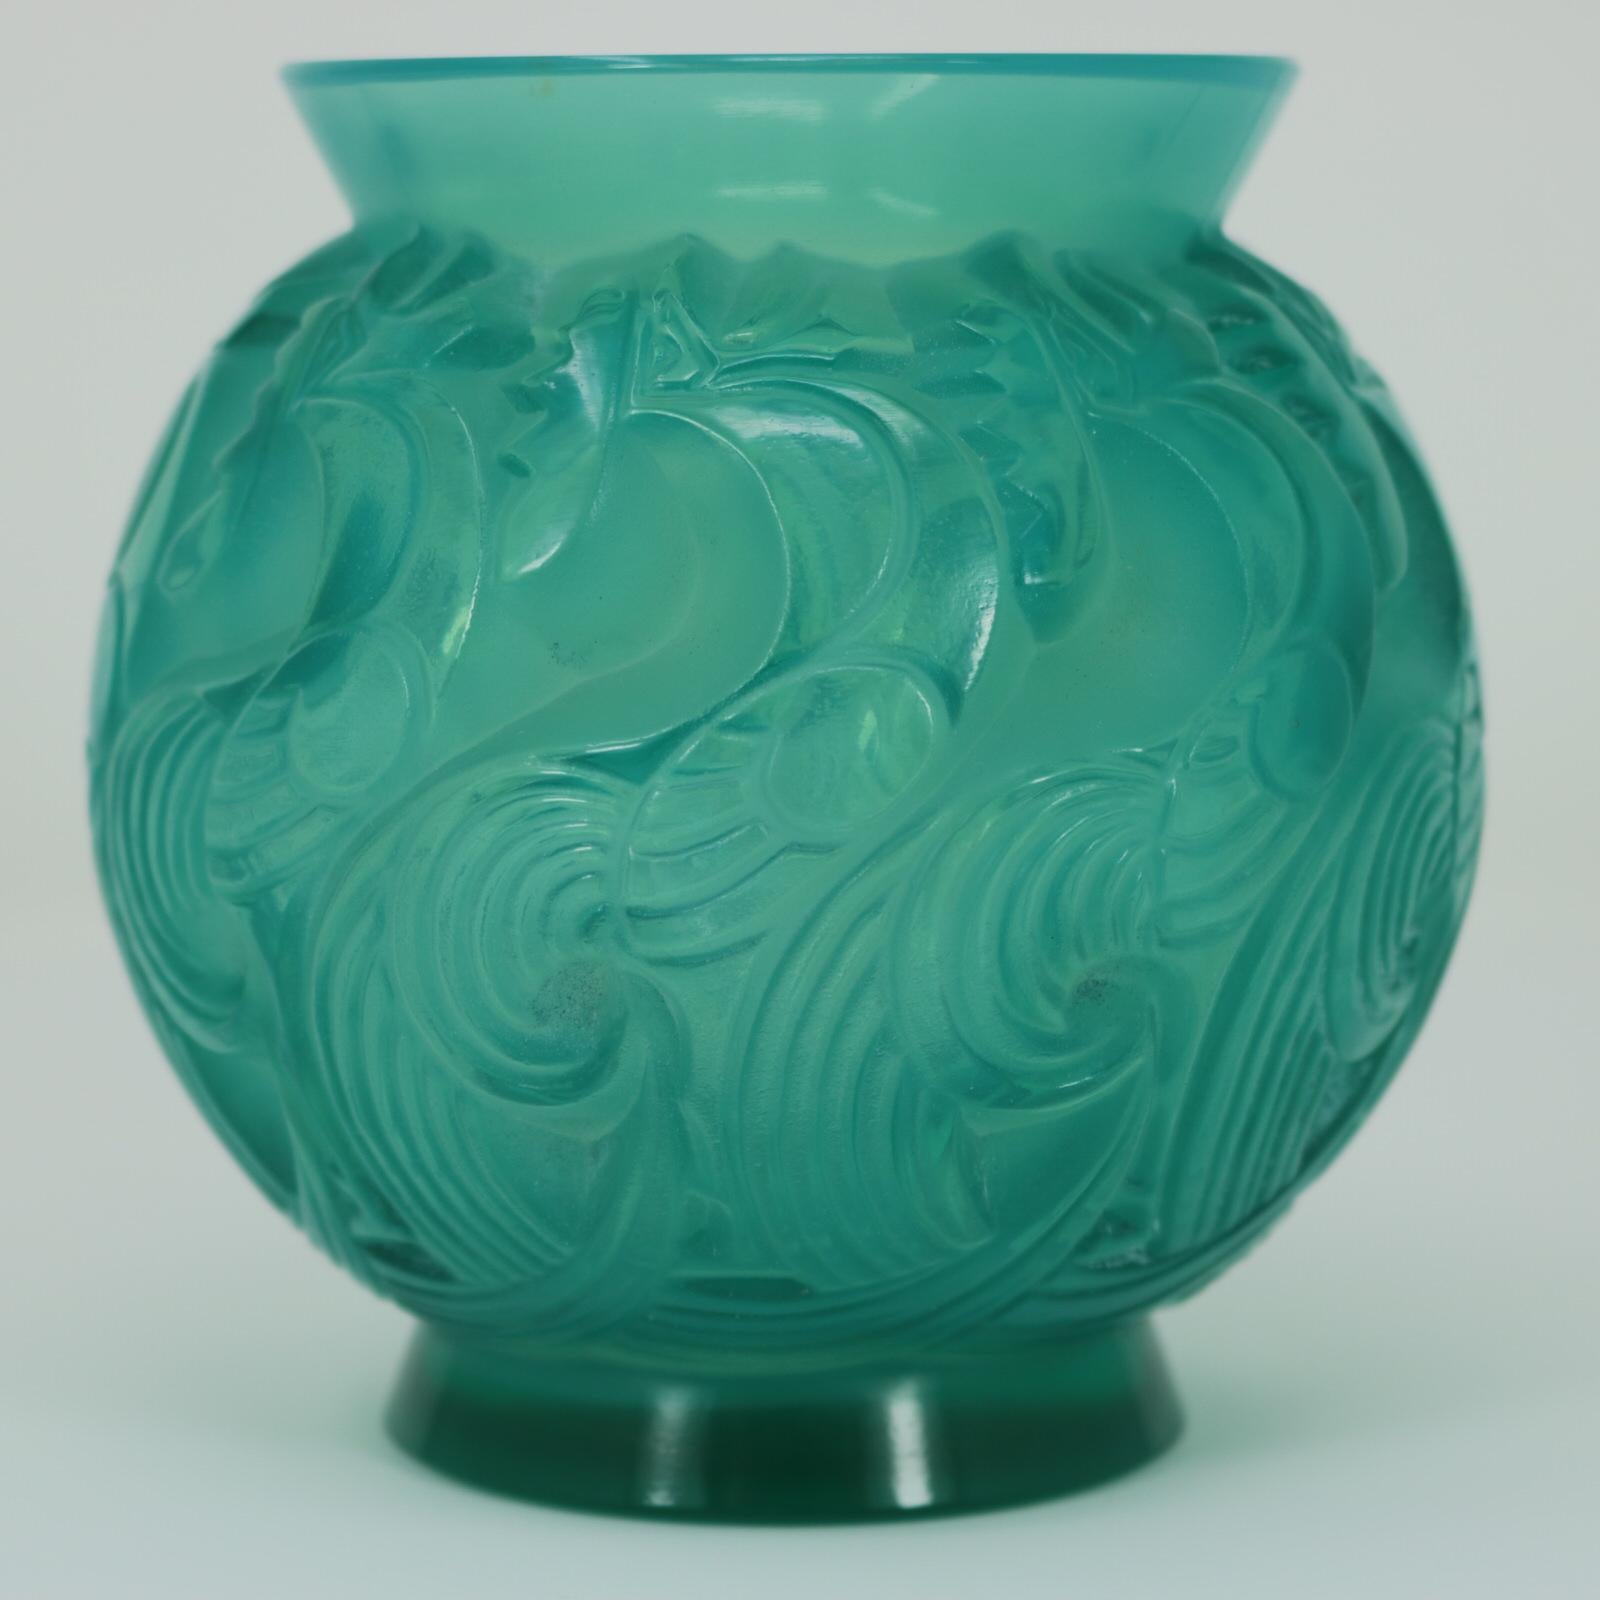 Rene Lalique mint coloured and opalescent glass 'Le Mans' vase. This pattern features crowing cockerels/roosters around the sides. Stenciled makers mark, 'R LALIQUE FRANCE' to the underside. Book reference: Marcilhac 1074.